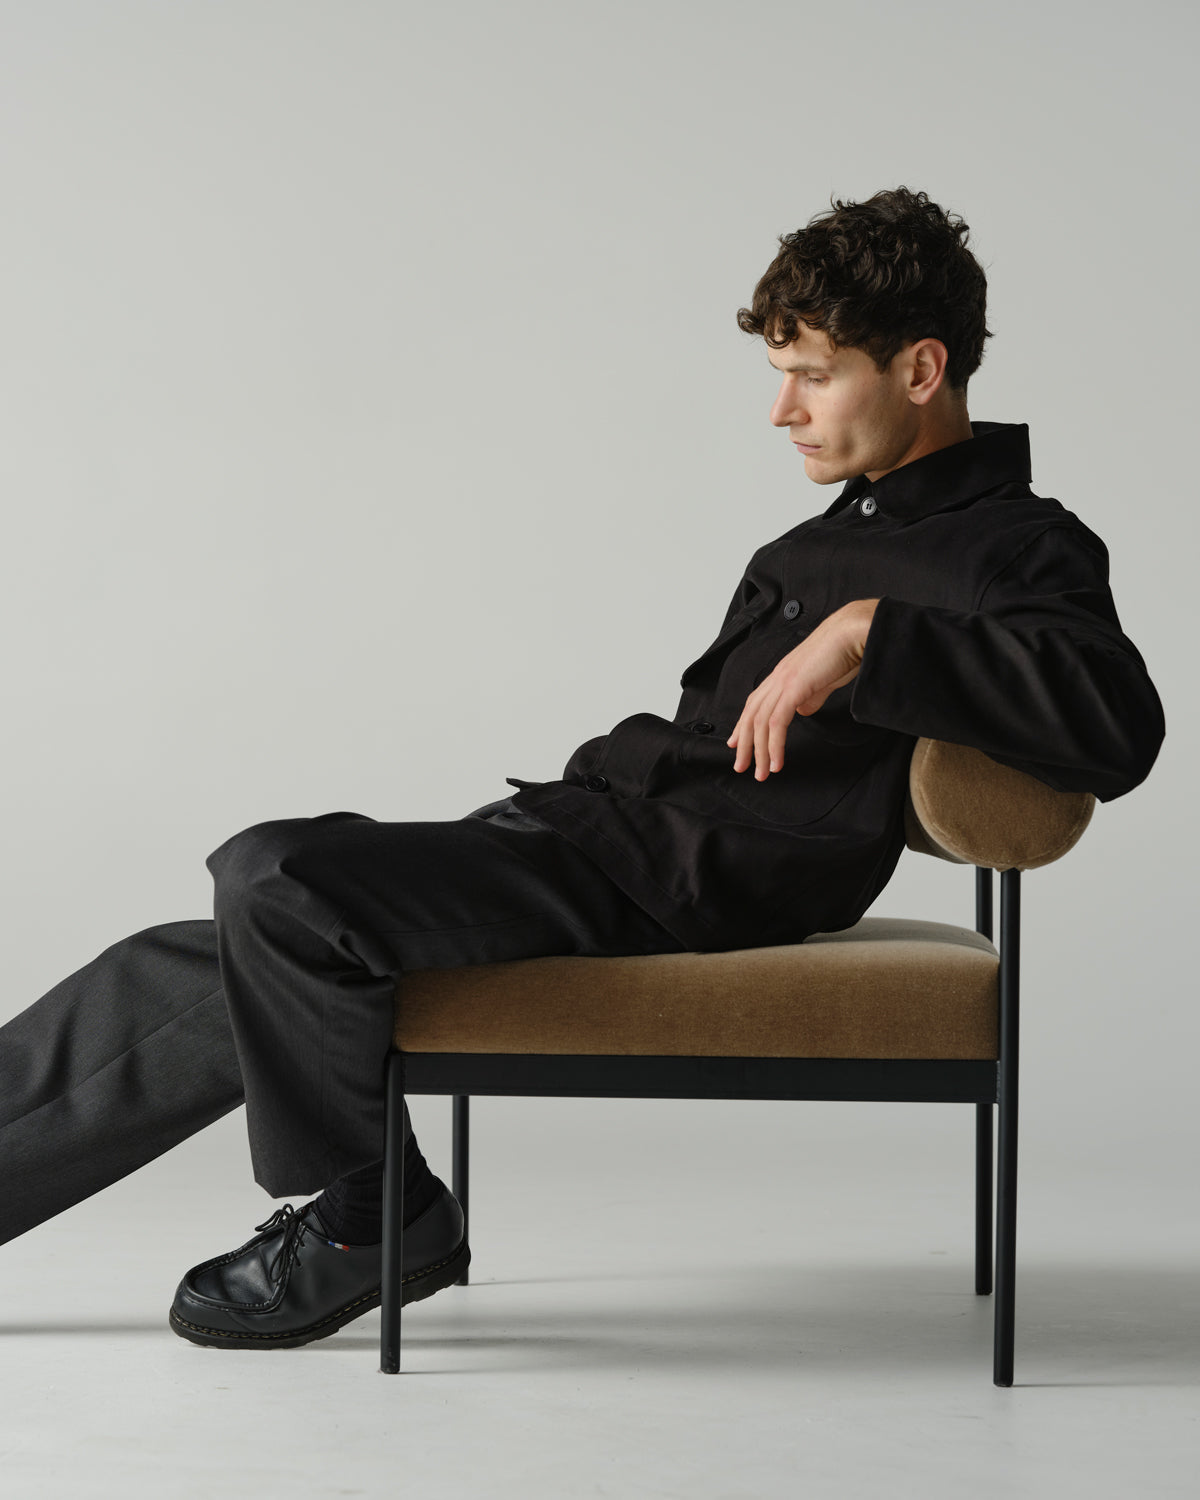 Male model sitting on chair wearing a black jacket and charcoal trouser